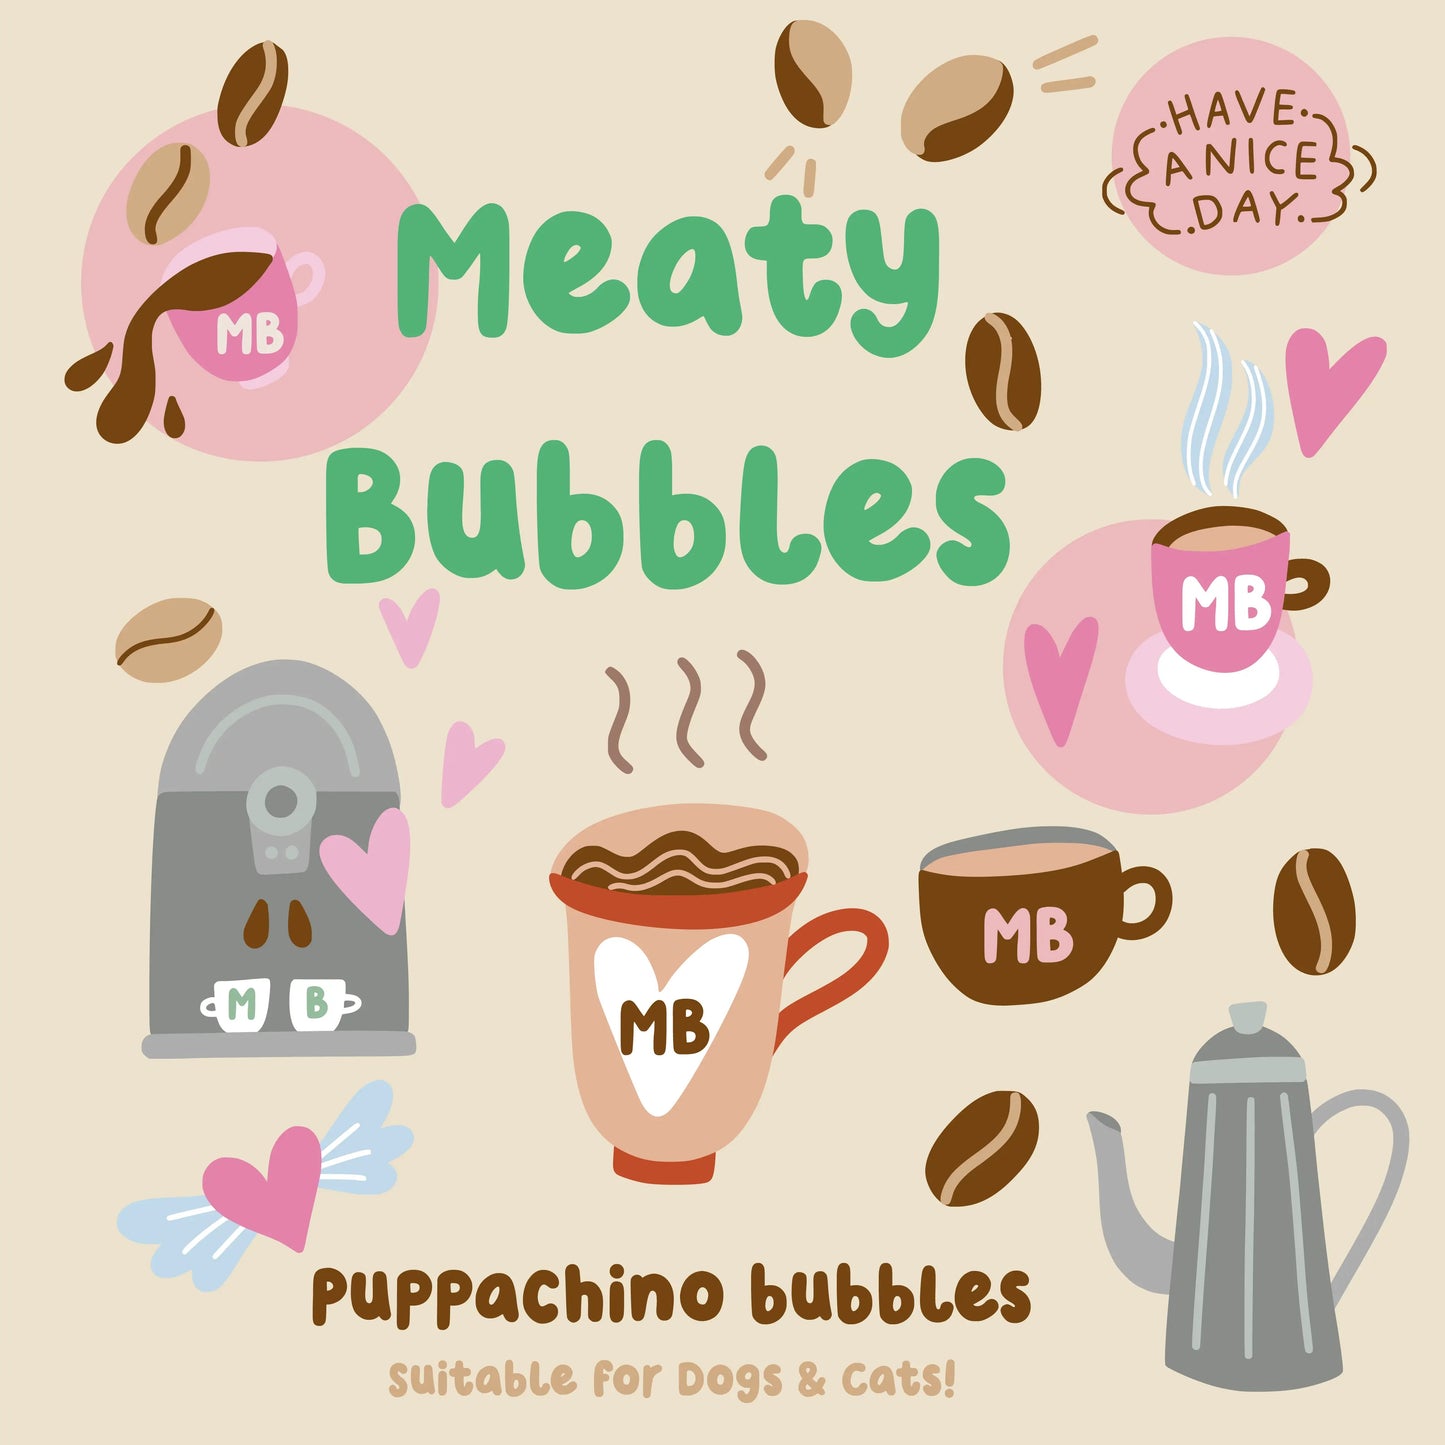 Meaty Bubbles - Puppachino Flavoured Bubbles for Dogs and Puppies